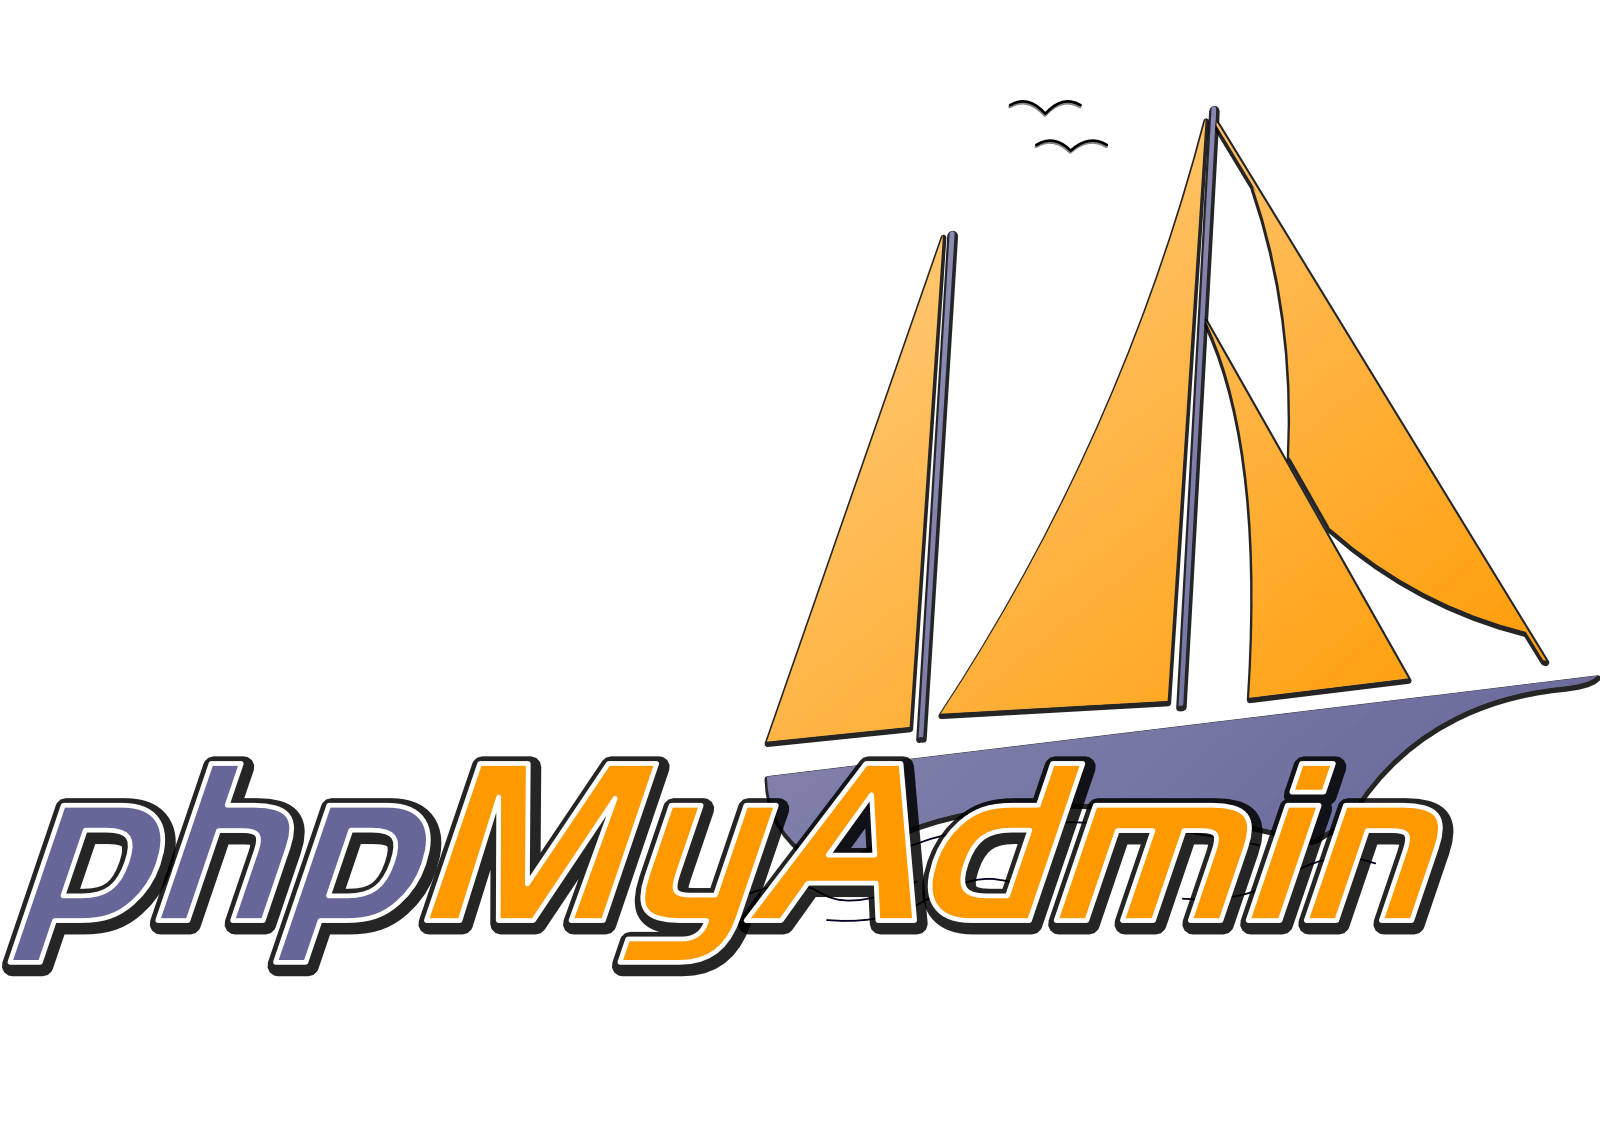 Free phpMyAdmin downloads and reviews for windows from your continent